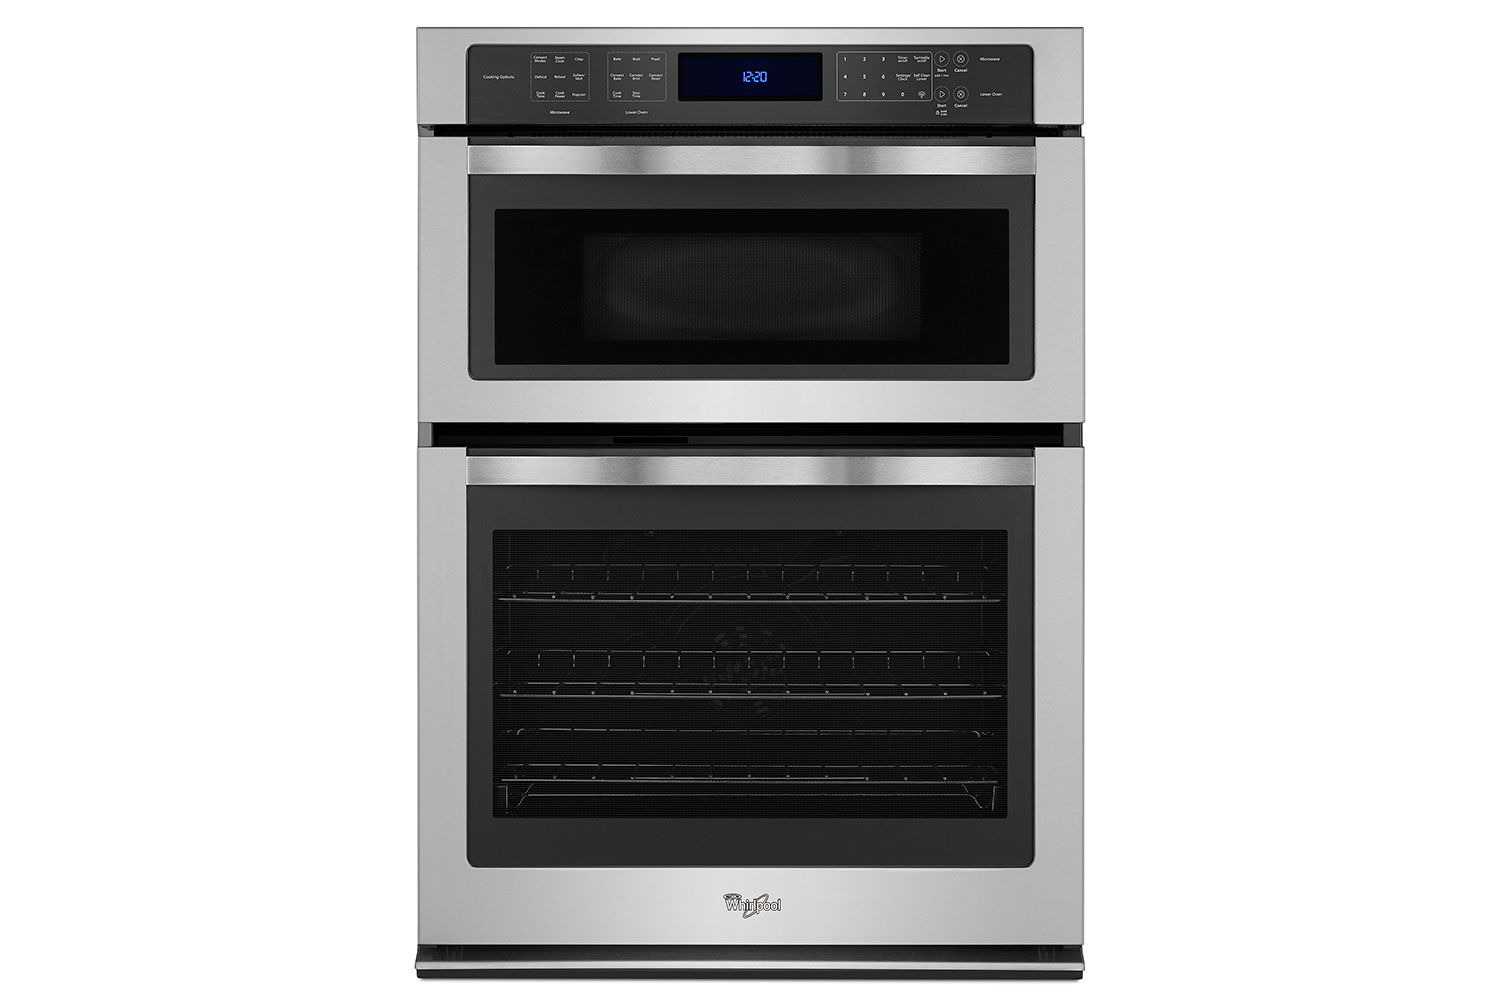 whirlpools smart appliances work with nest and amazon dash whirlpool 6 4 cu  ft combination wall oven p150072 3z